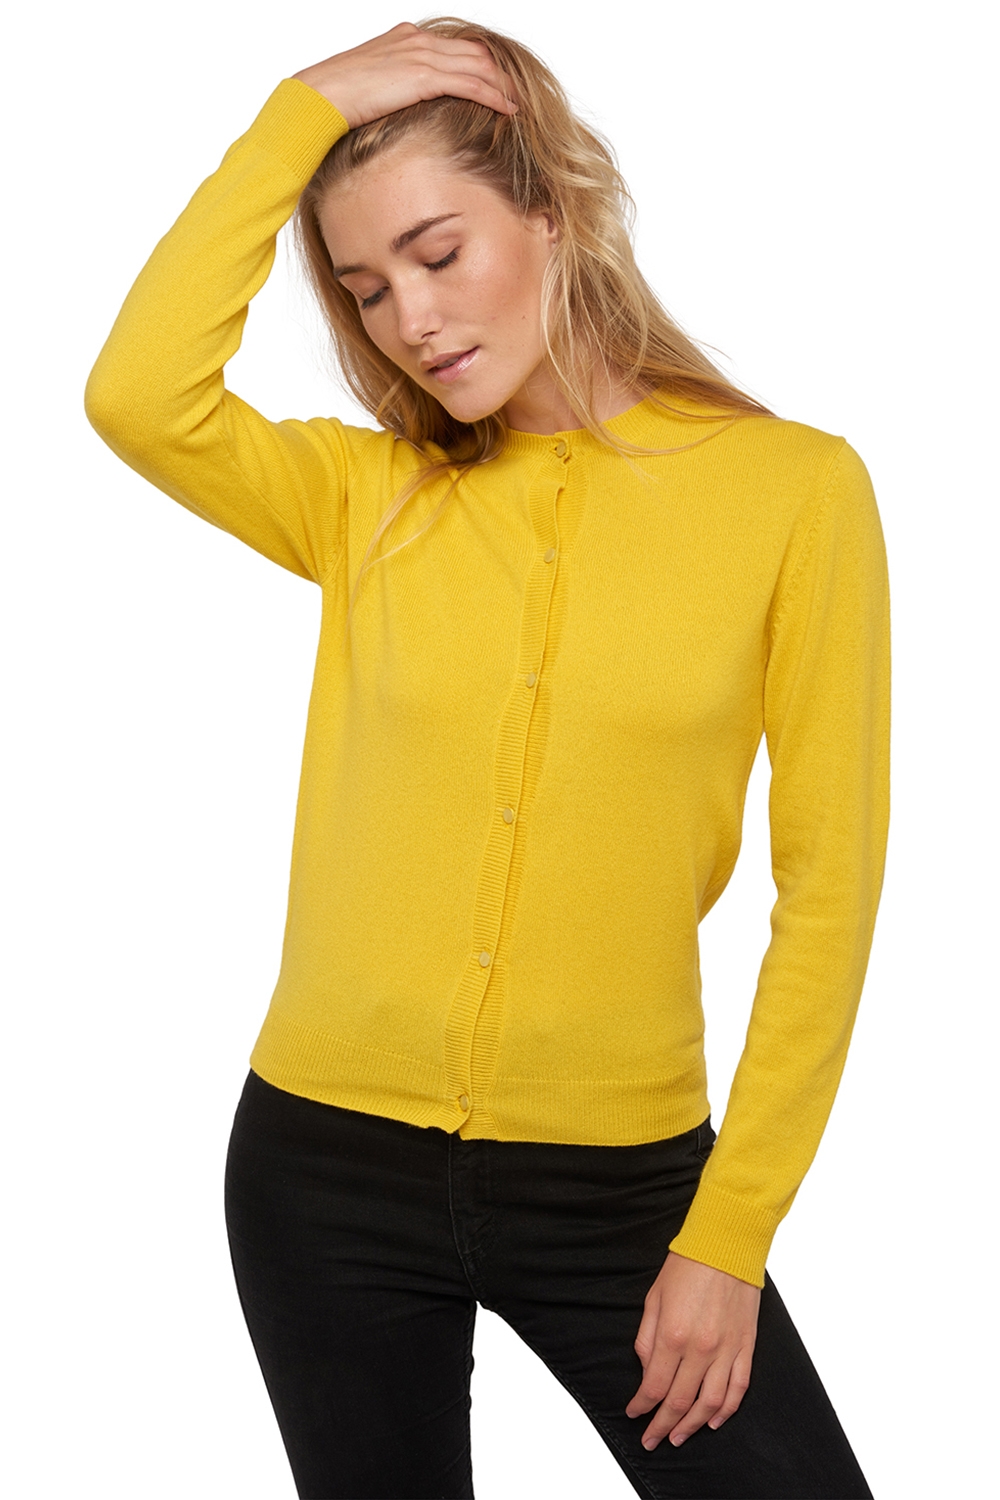 Cashmere ladies cardigans tyra first sunny yellow 2xl